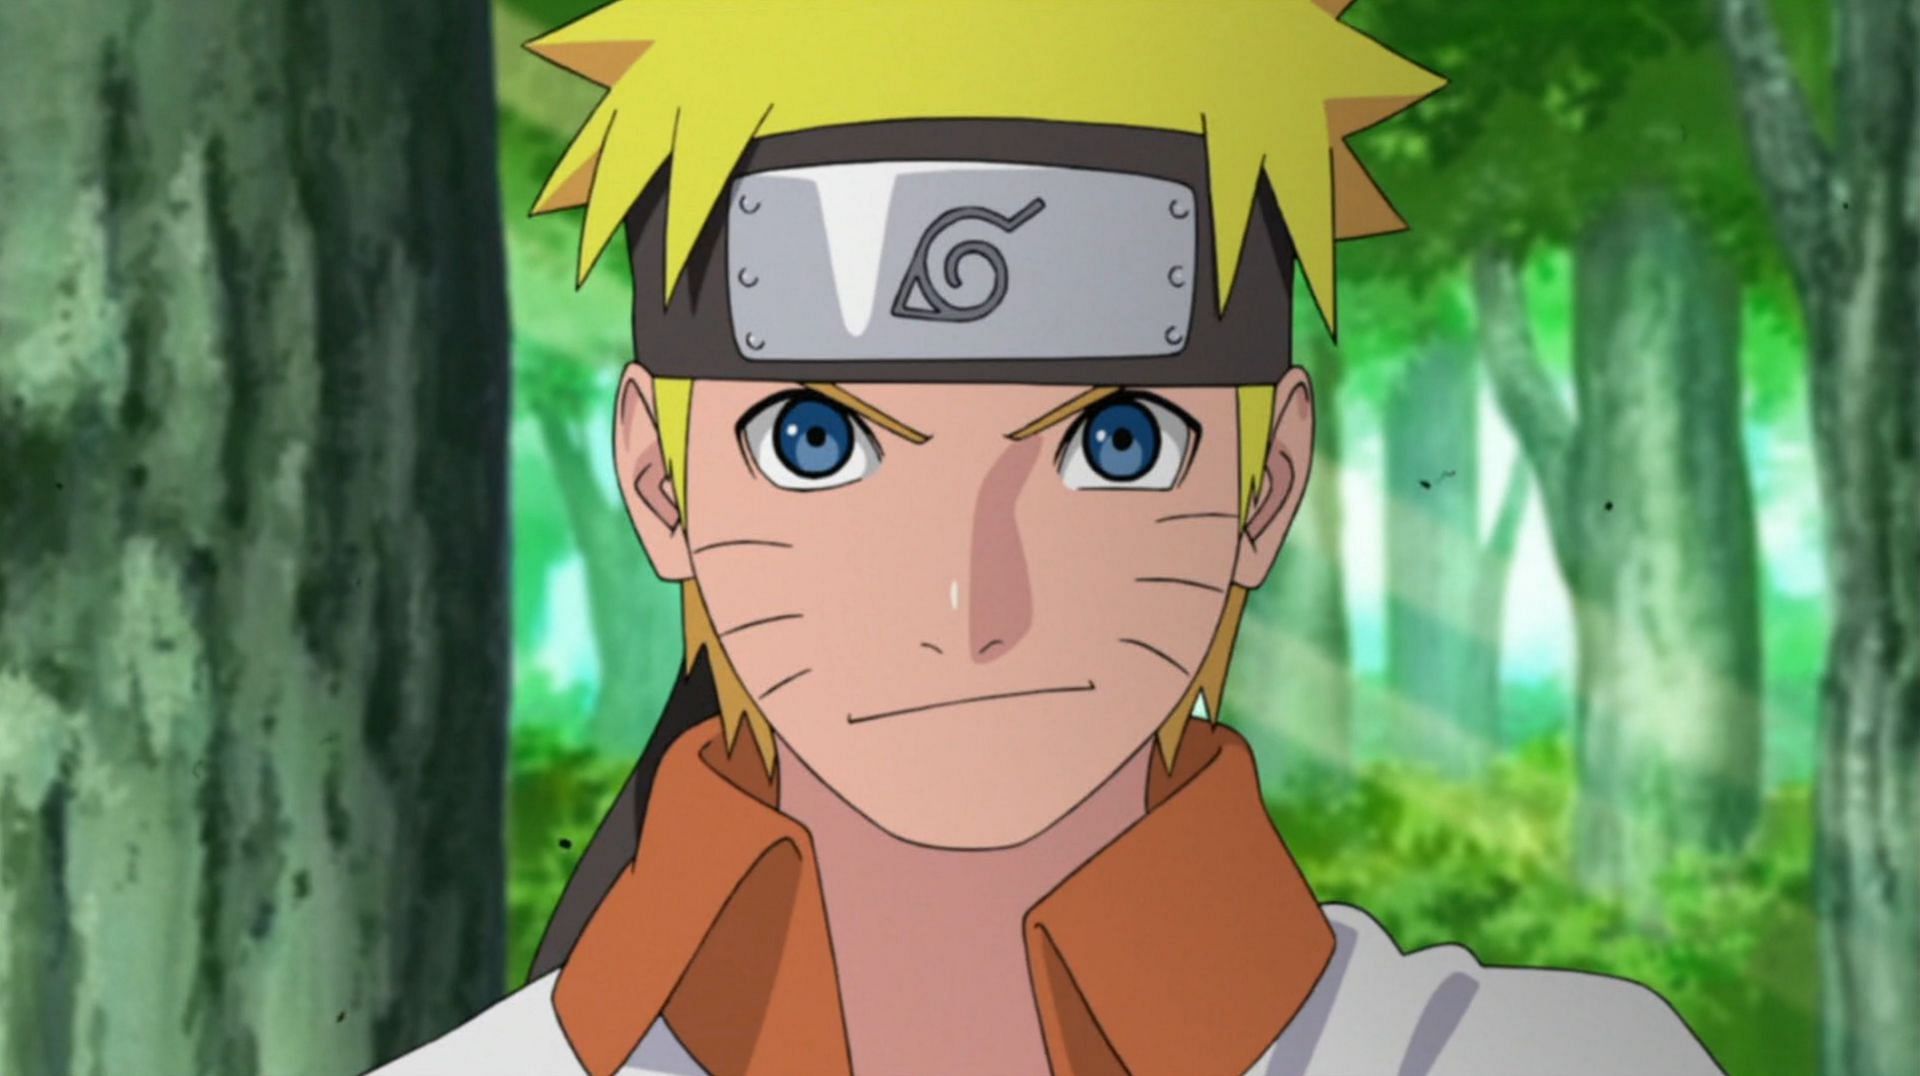 The 'Naruto' Live-Action Film Being Rewritten Instead of Being Destroyed